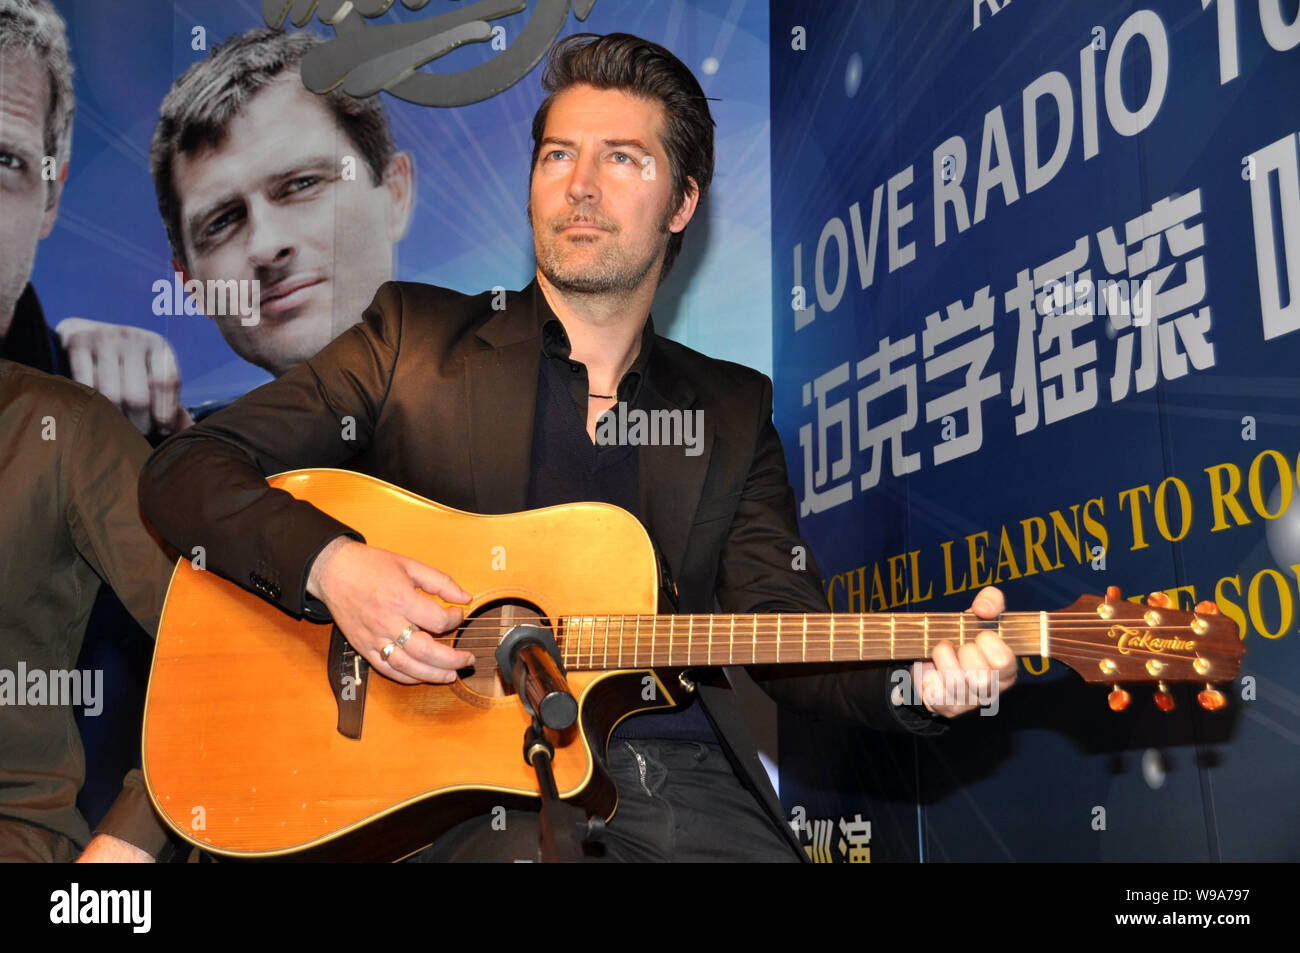 Danish rock band Michael Learns to Rock, known as MLTR, performs during a meeting with Chinese fans in Shanghai, China, 6 December 2010.   Michael Lea Stock Photo